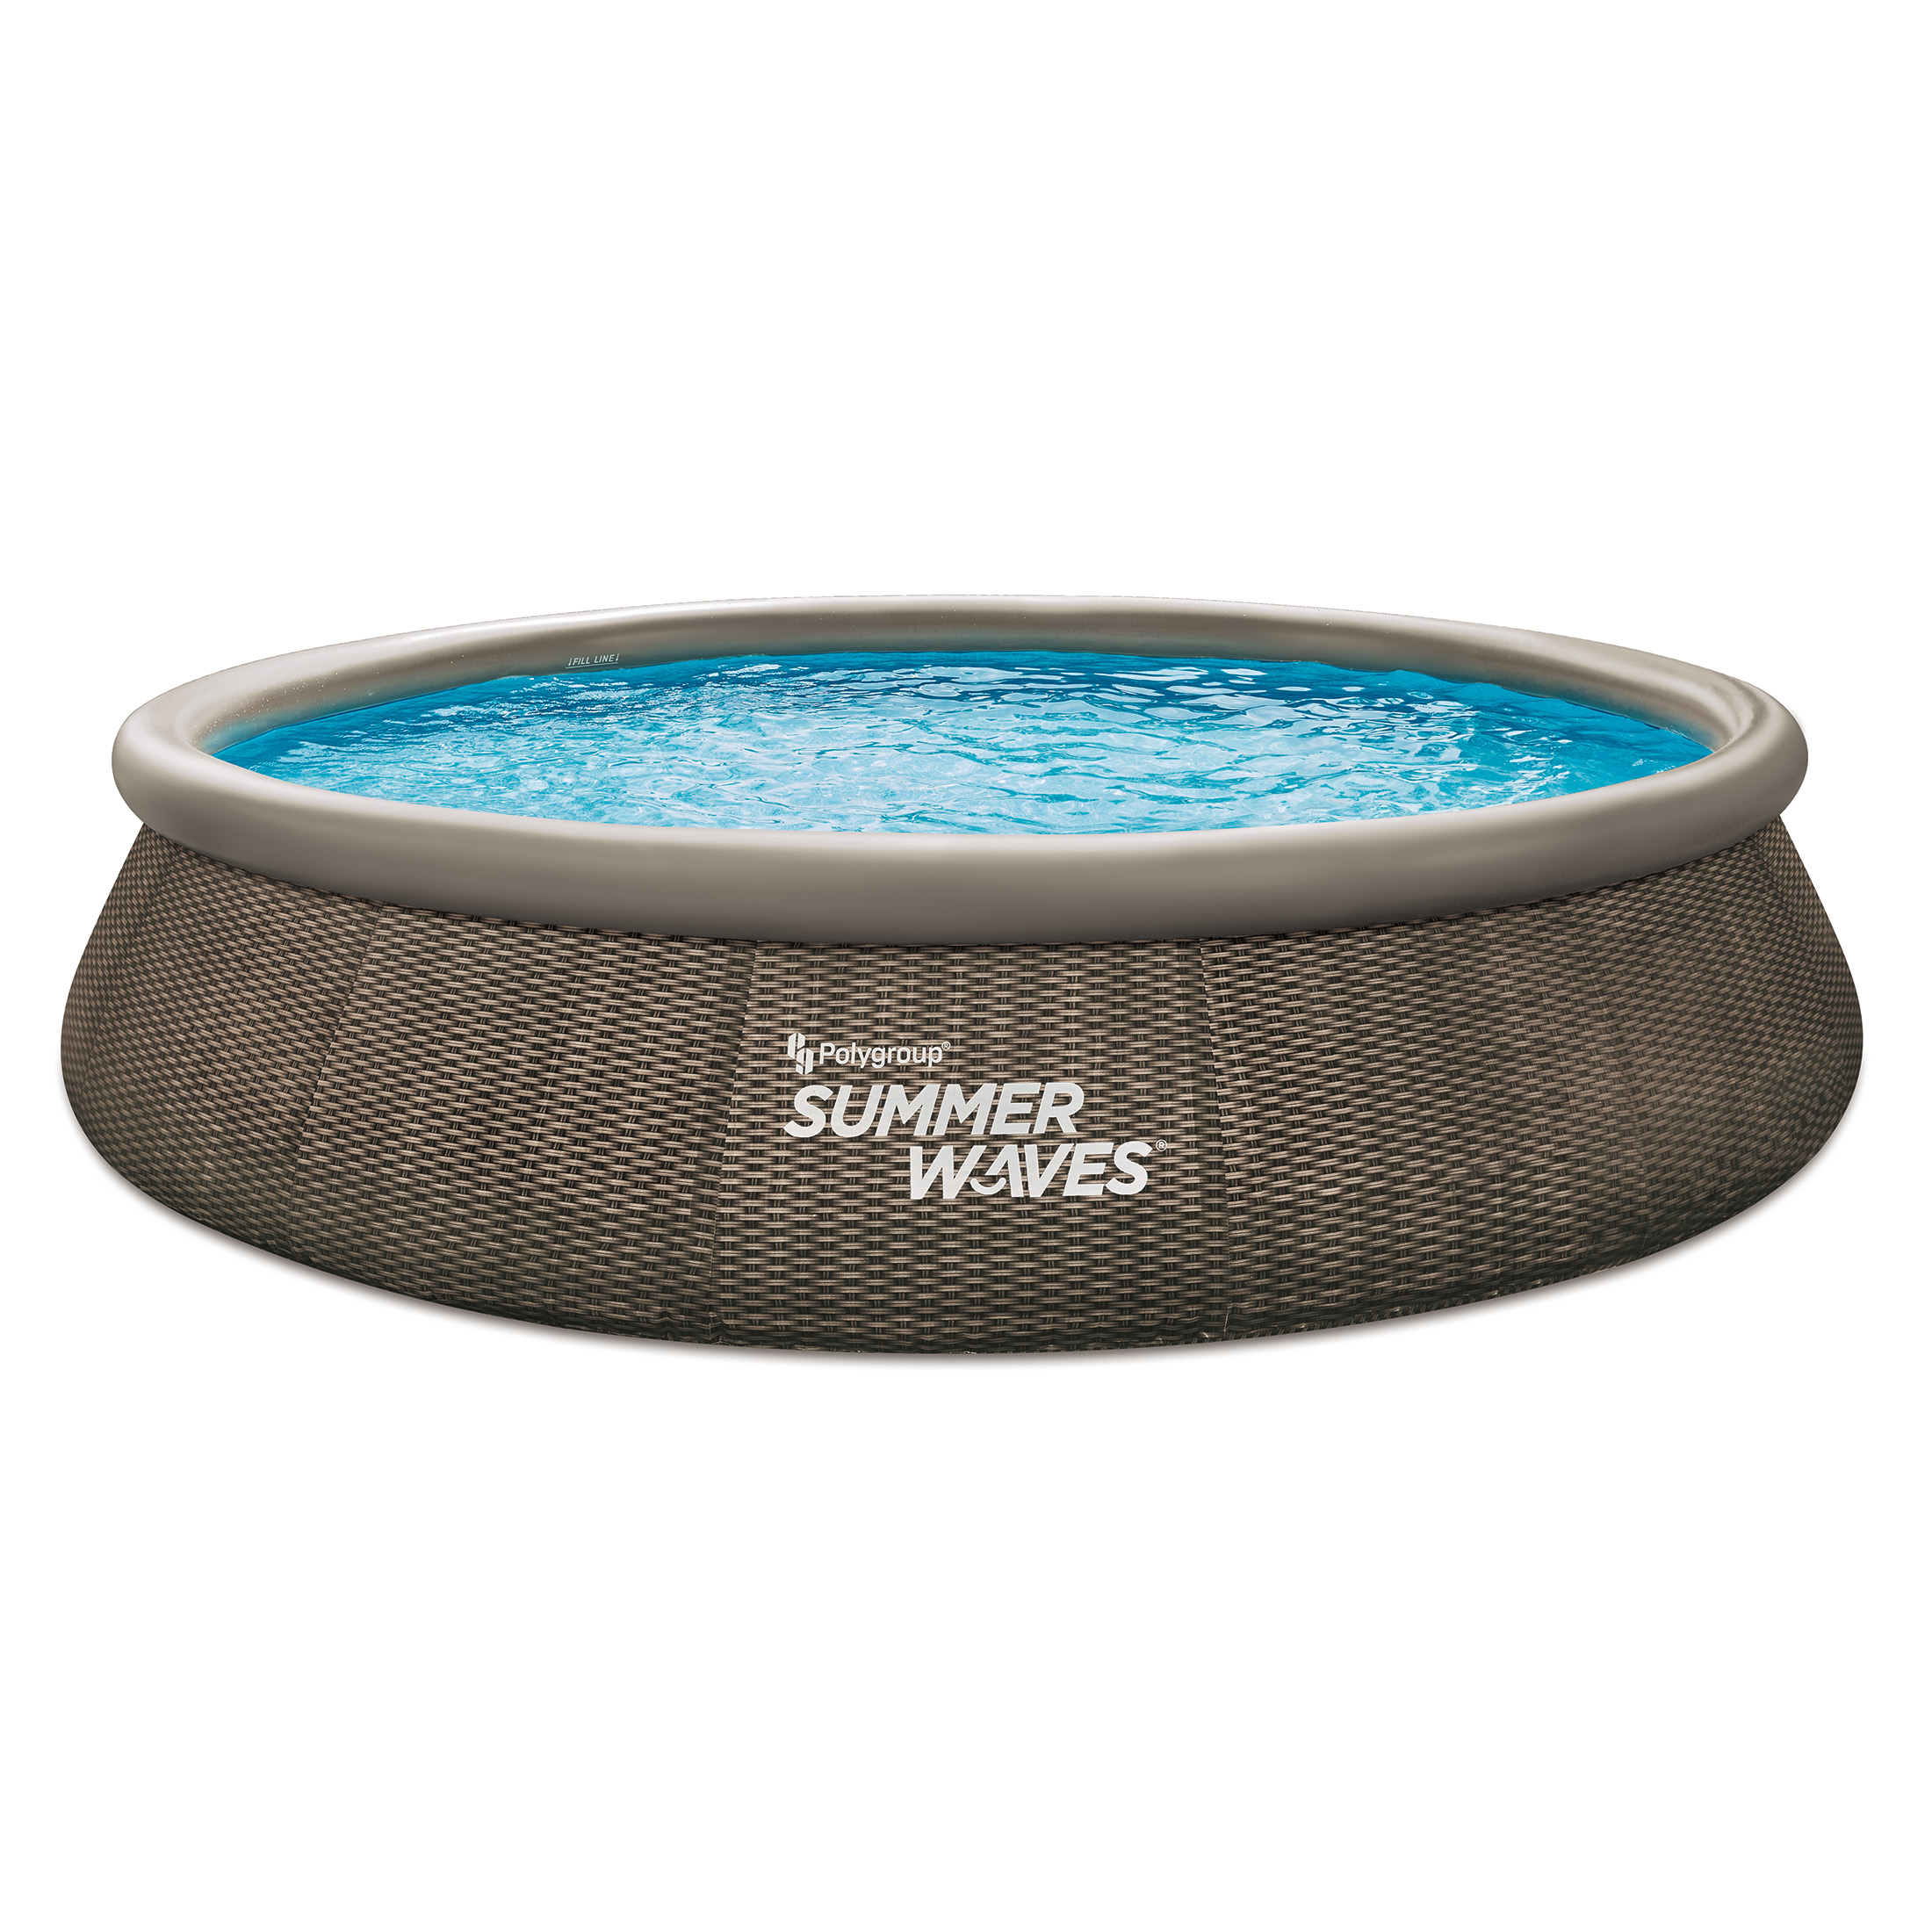 Summer Waves 15 ft Dark Double Rattan Quick Set Pool, Round, Ages 6+, Unisex - image 1 of 5